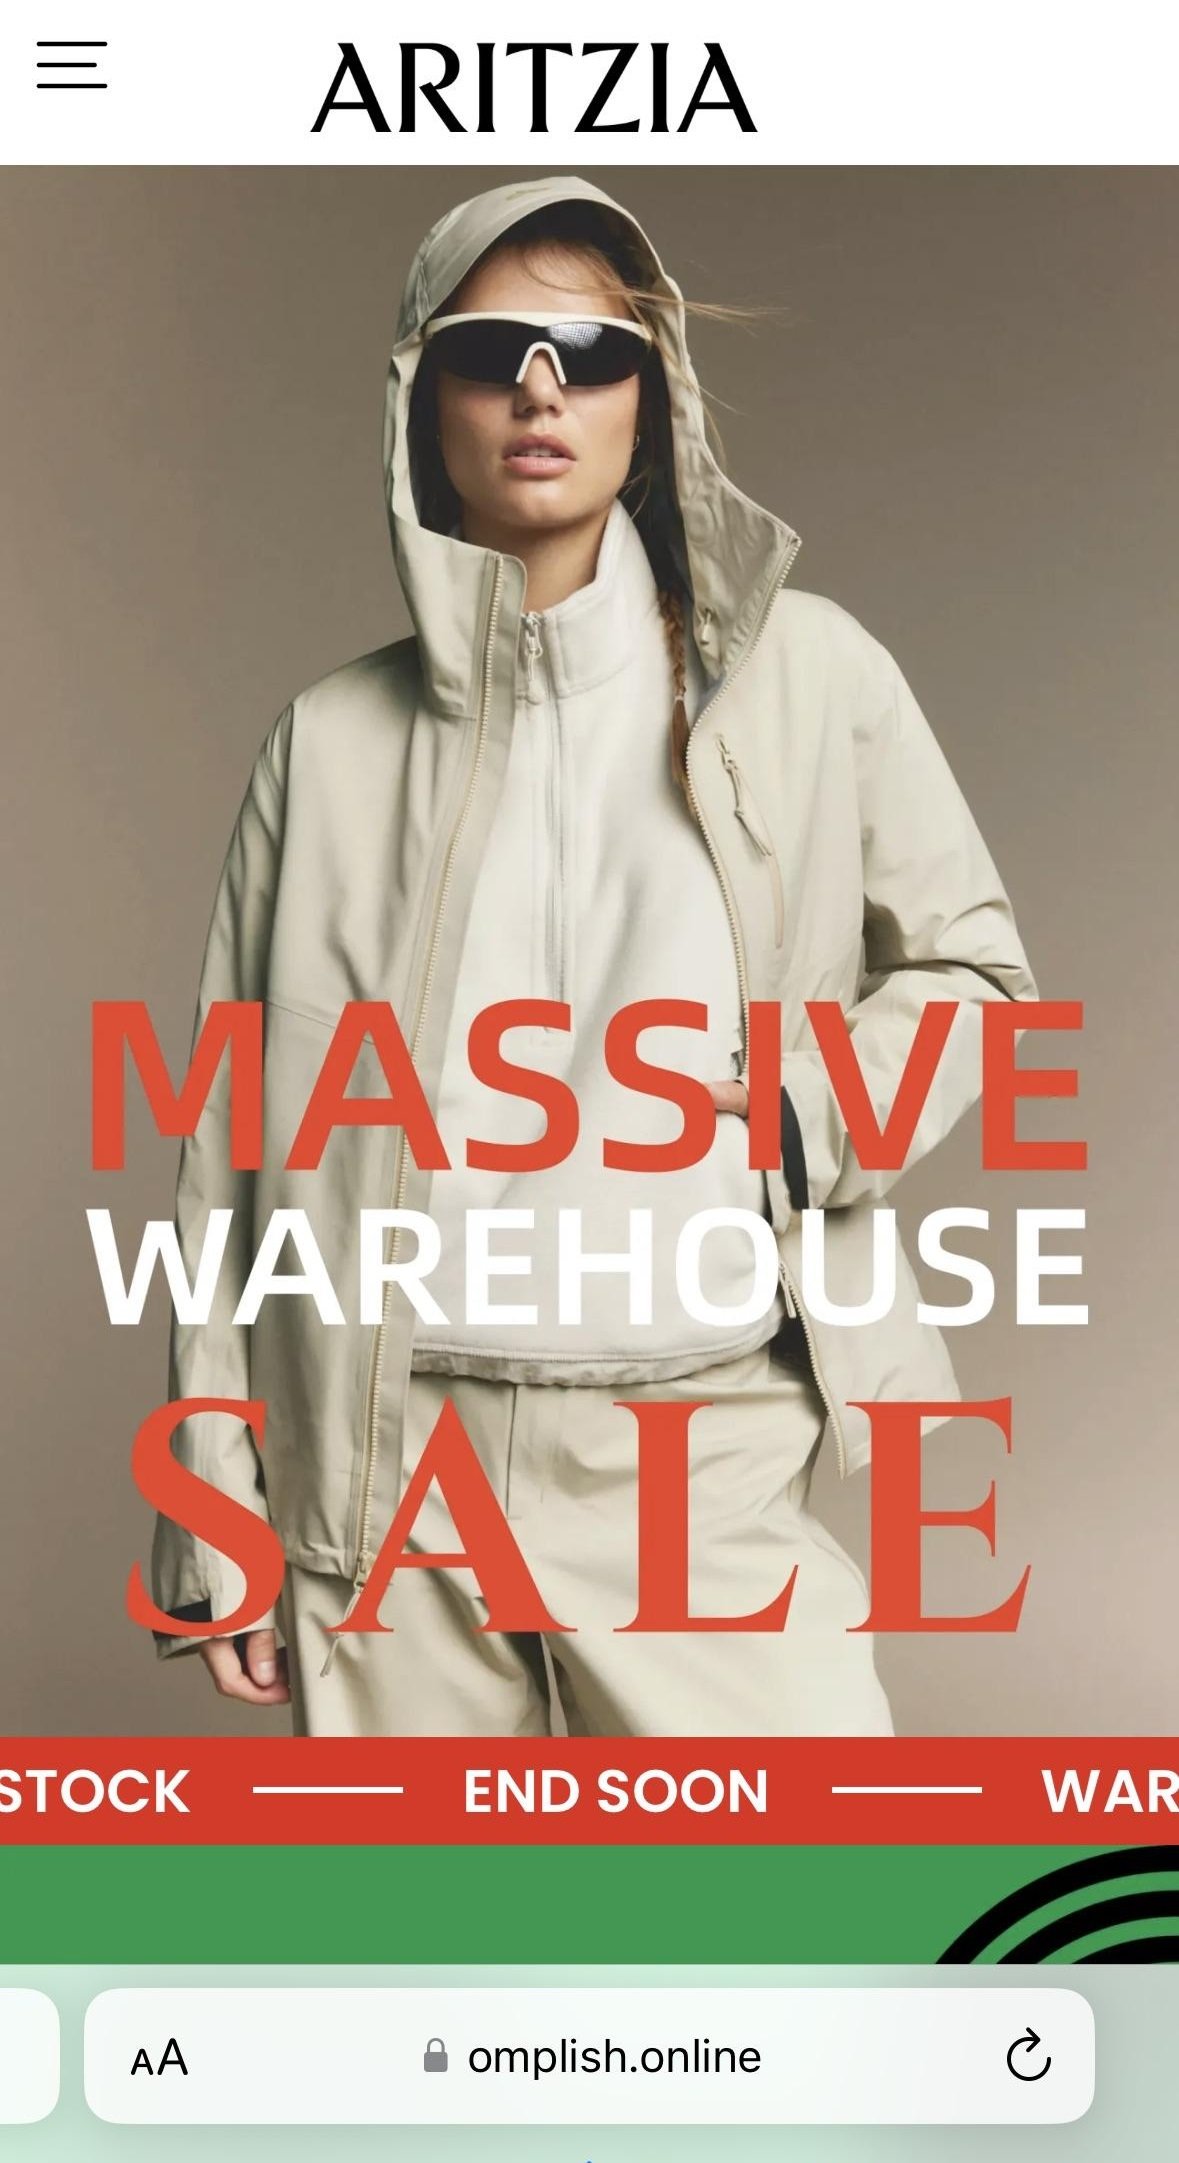 Aritzia Warehouse Sale located at omplish.online